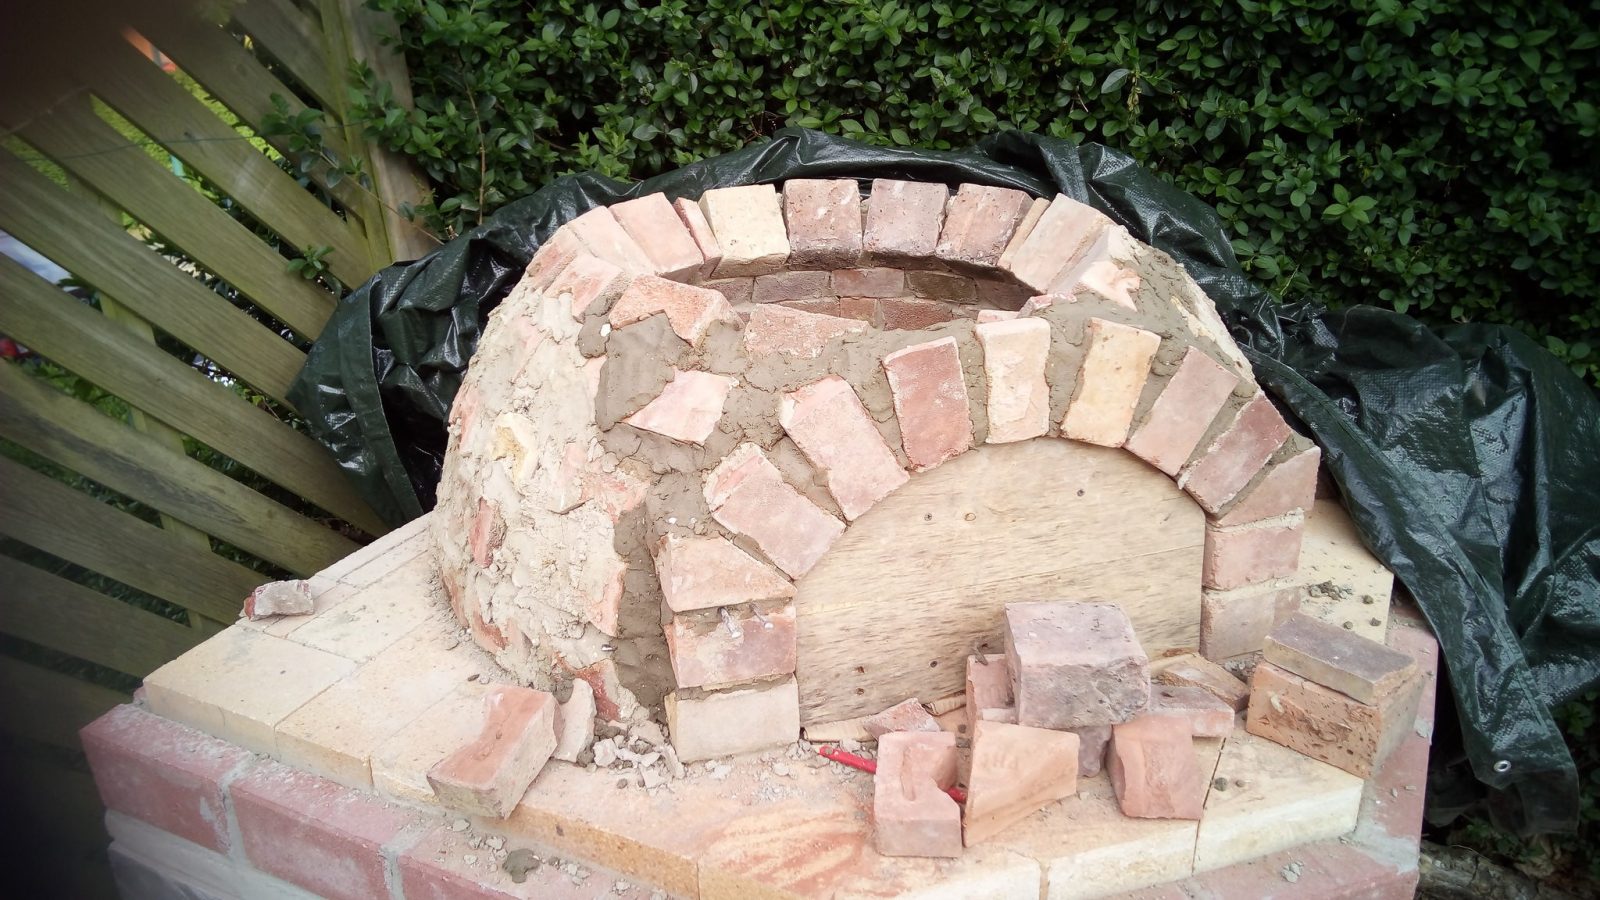 Pizza Oven Build Part 5 - Starting the Dome 4